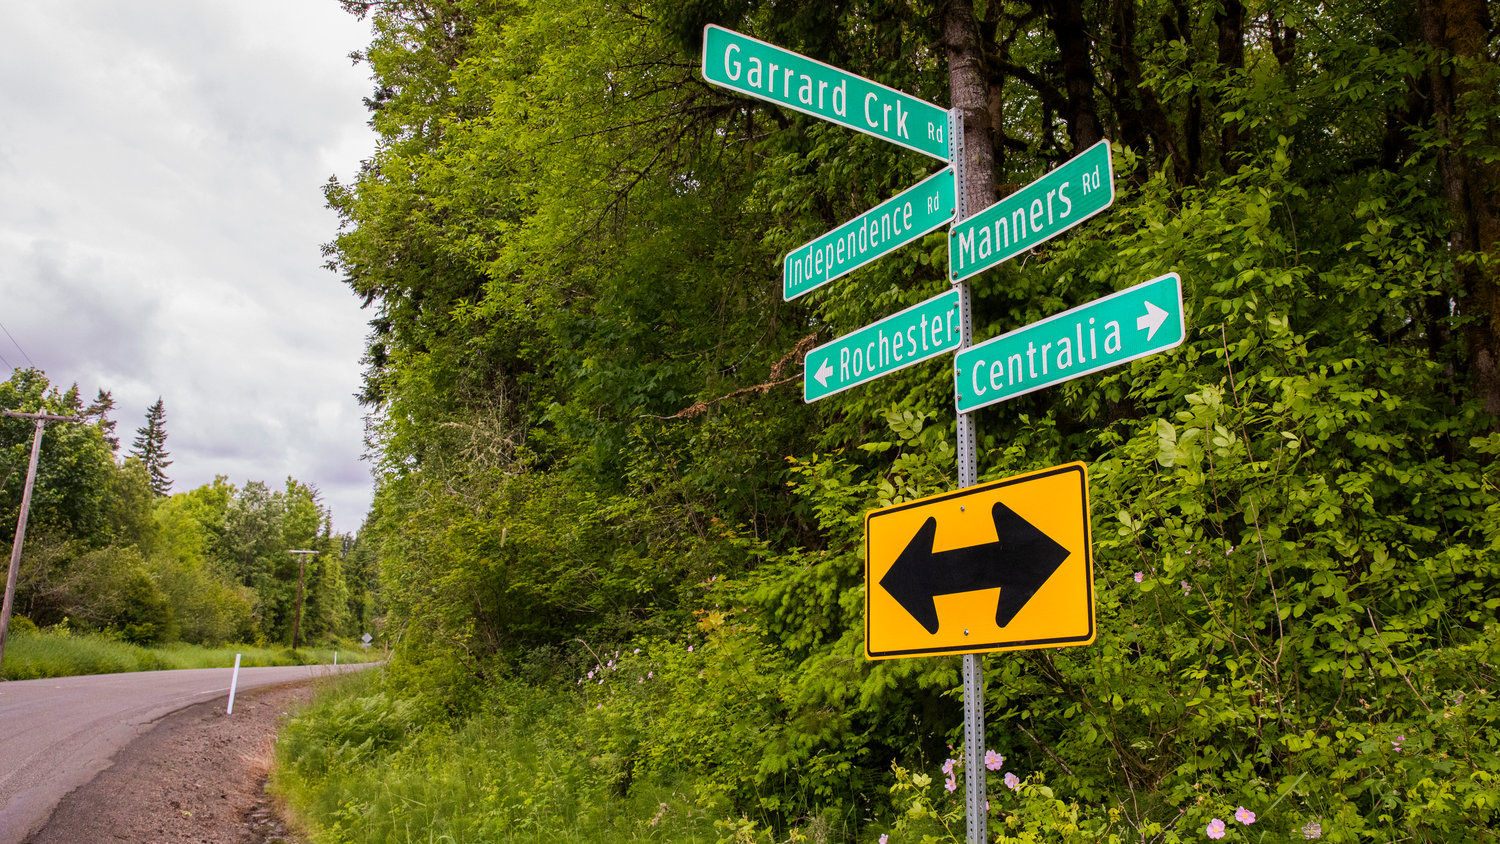 Road signs point in directions between Centralia and Rochester on Tuesday near Garrard Creek Road.